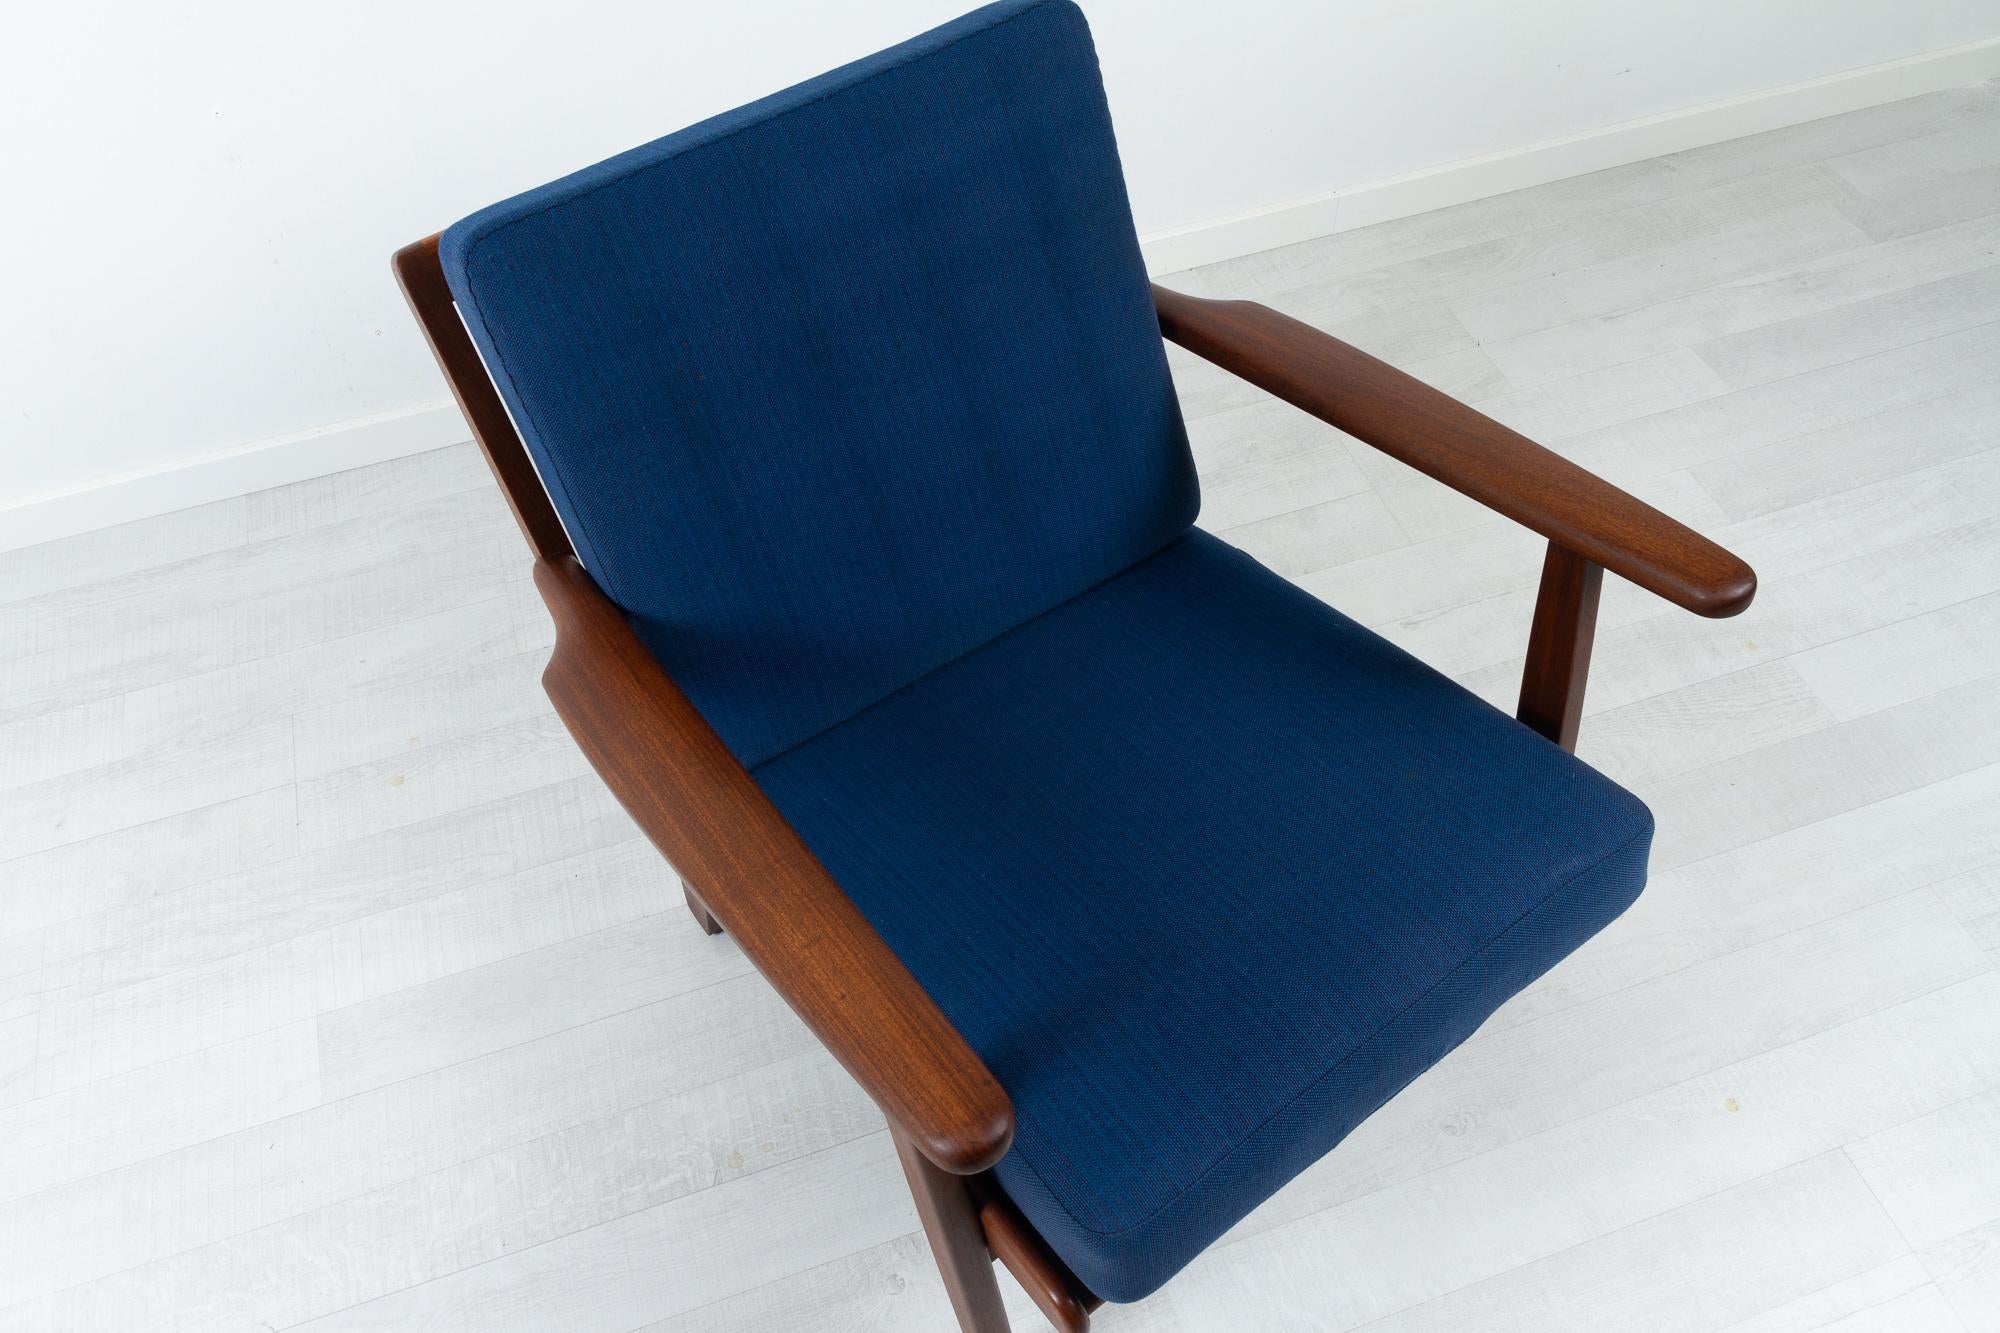 Vintage Danish Lounge Chair by Aage Pedersen for Getama, 1960s For Sale 2